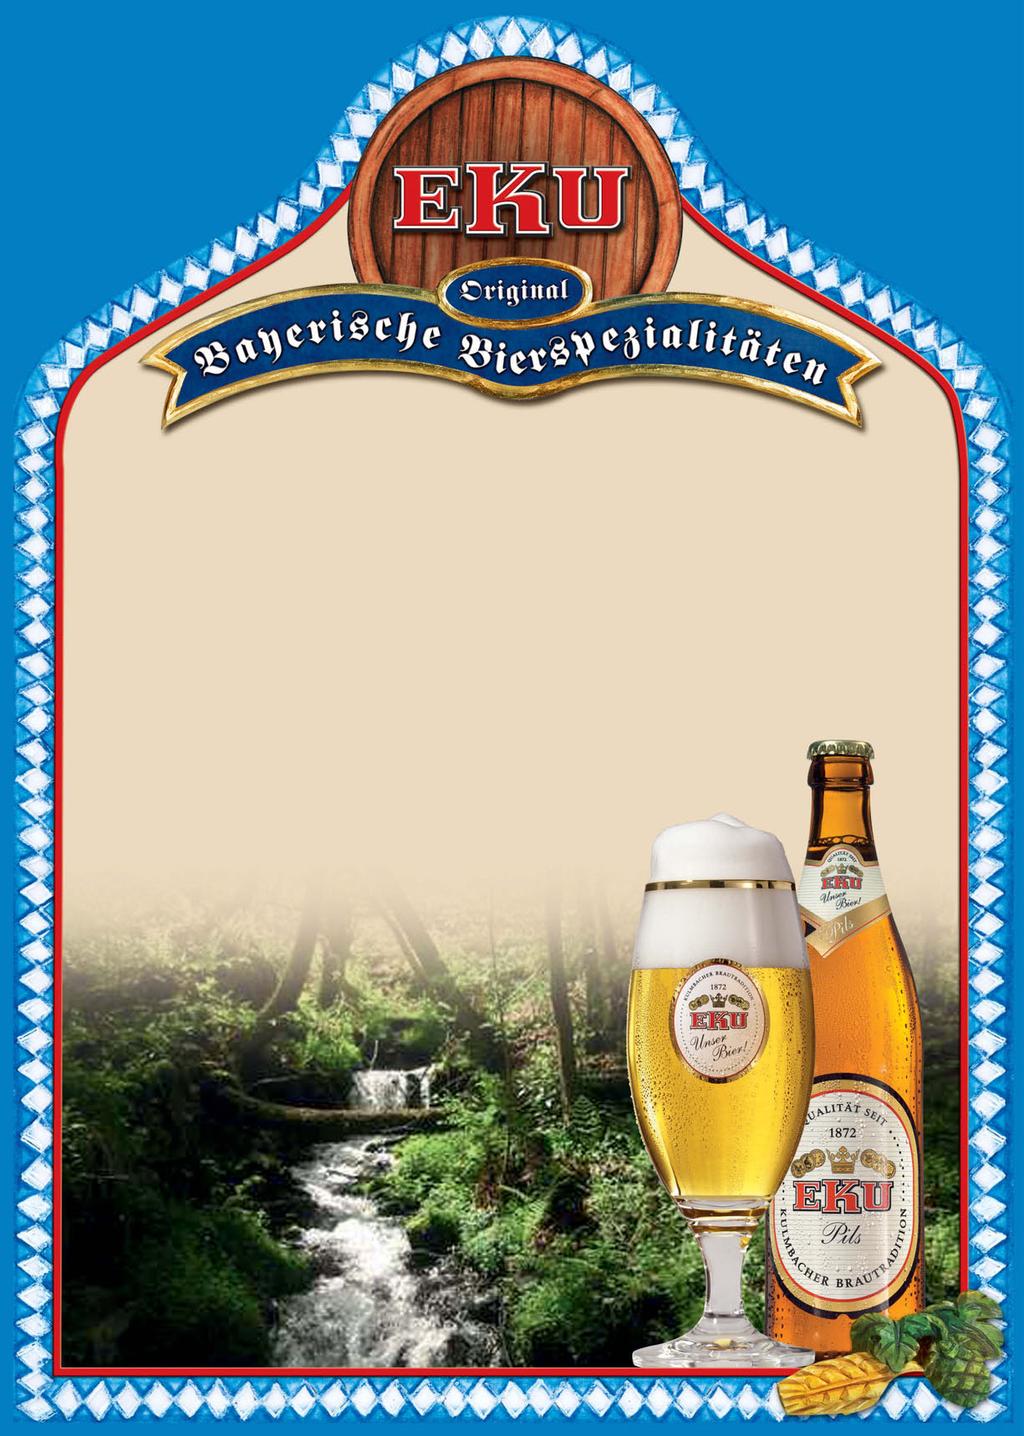 EKU specialty beers from Kulmbach are still brewed today the exact same way in strict accordance with the Purity Law, using only the natural ingredients water, hops, malt, and yeast.